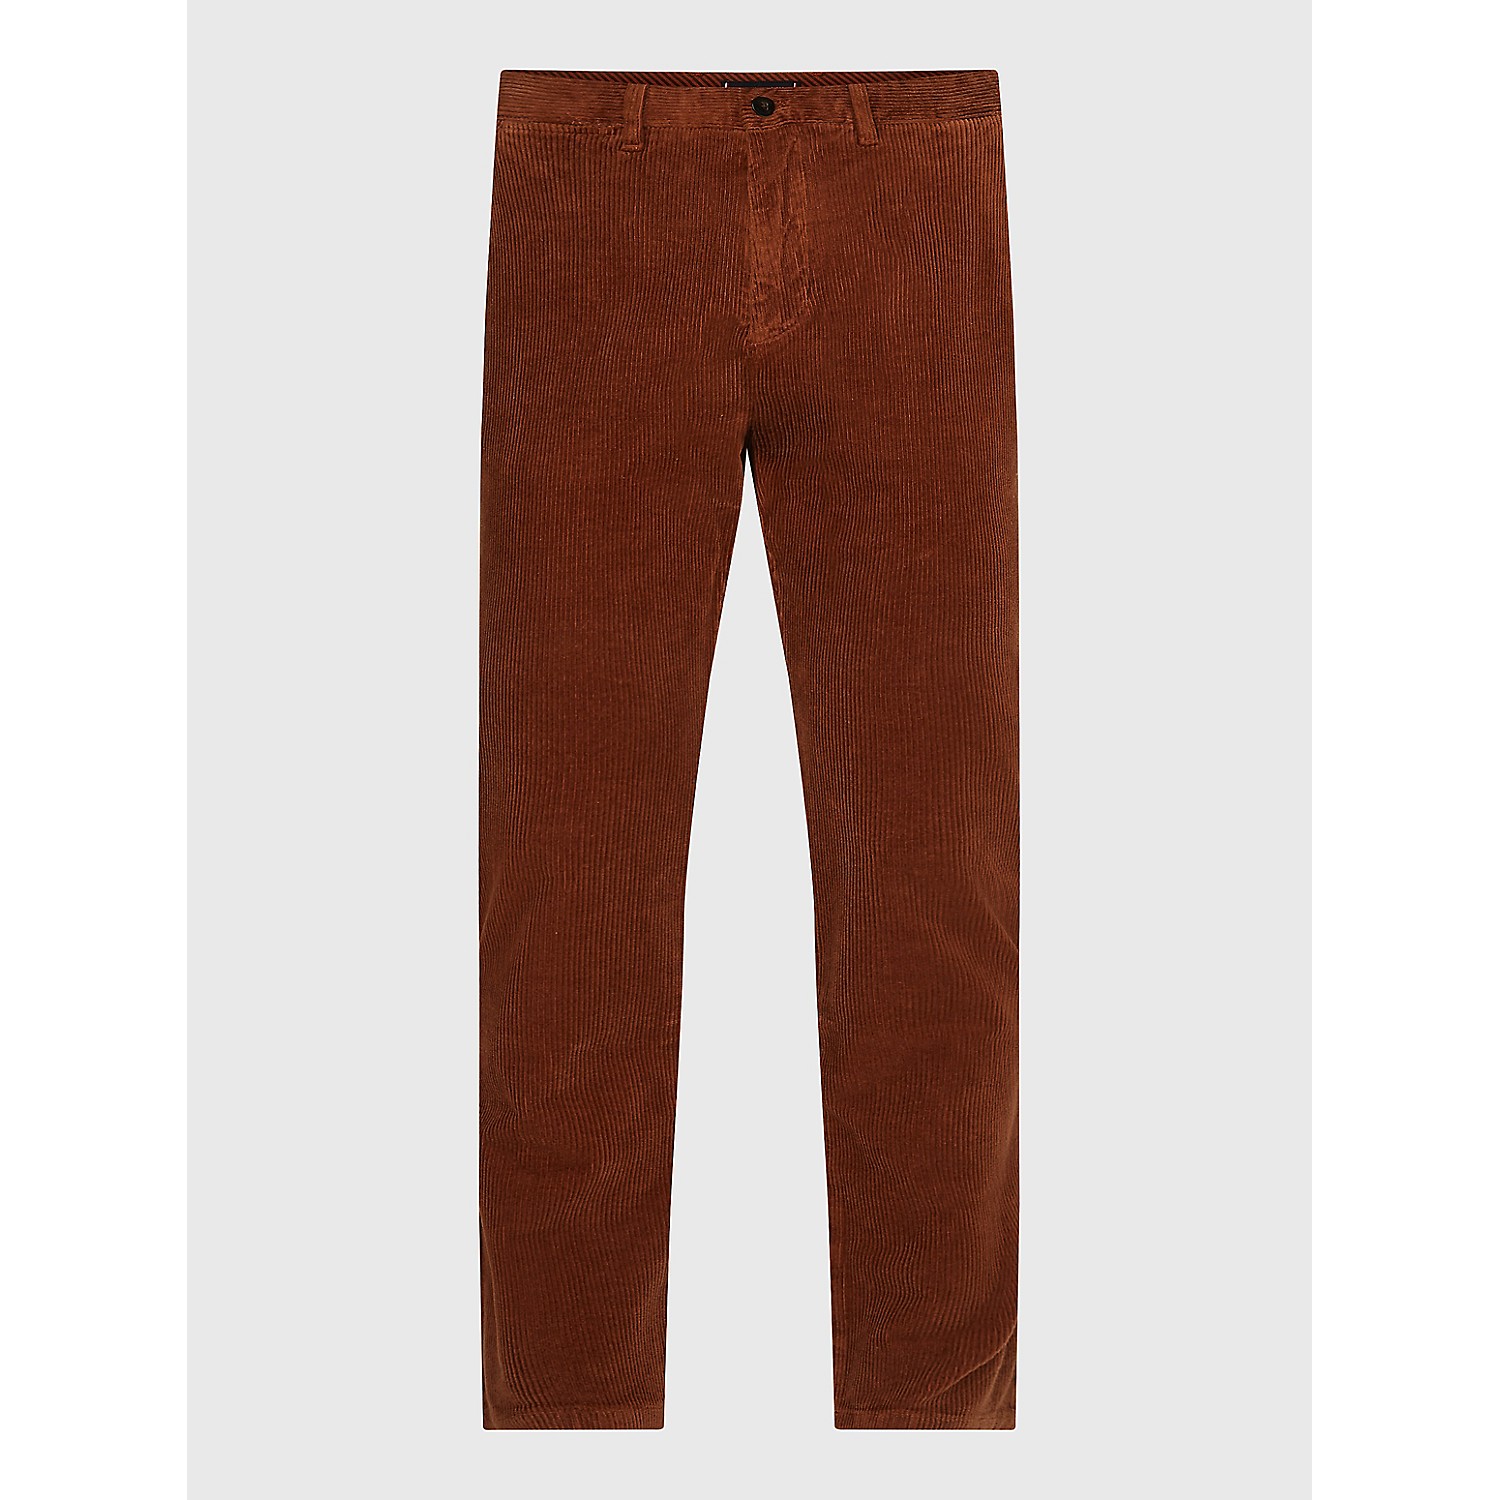 TOMMY HILFIGER Straight Fit Corduroy Chino